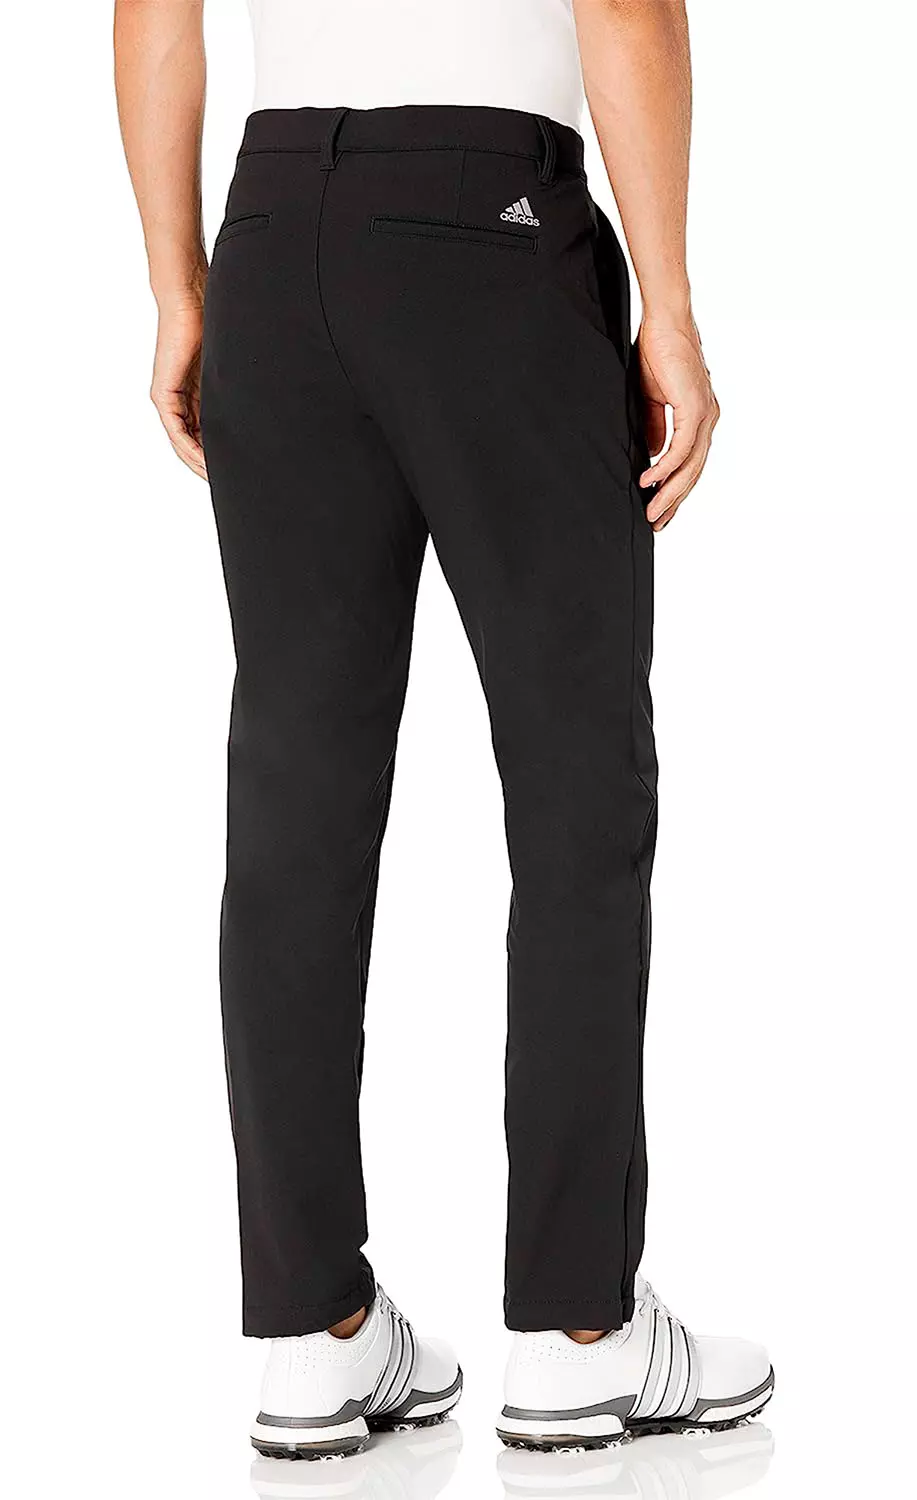 One of the best mens winter golf pants